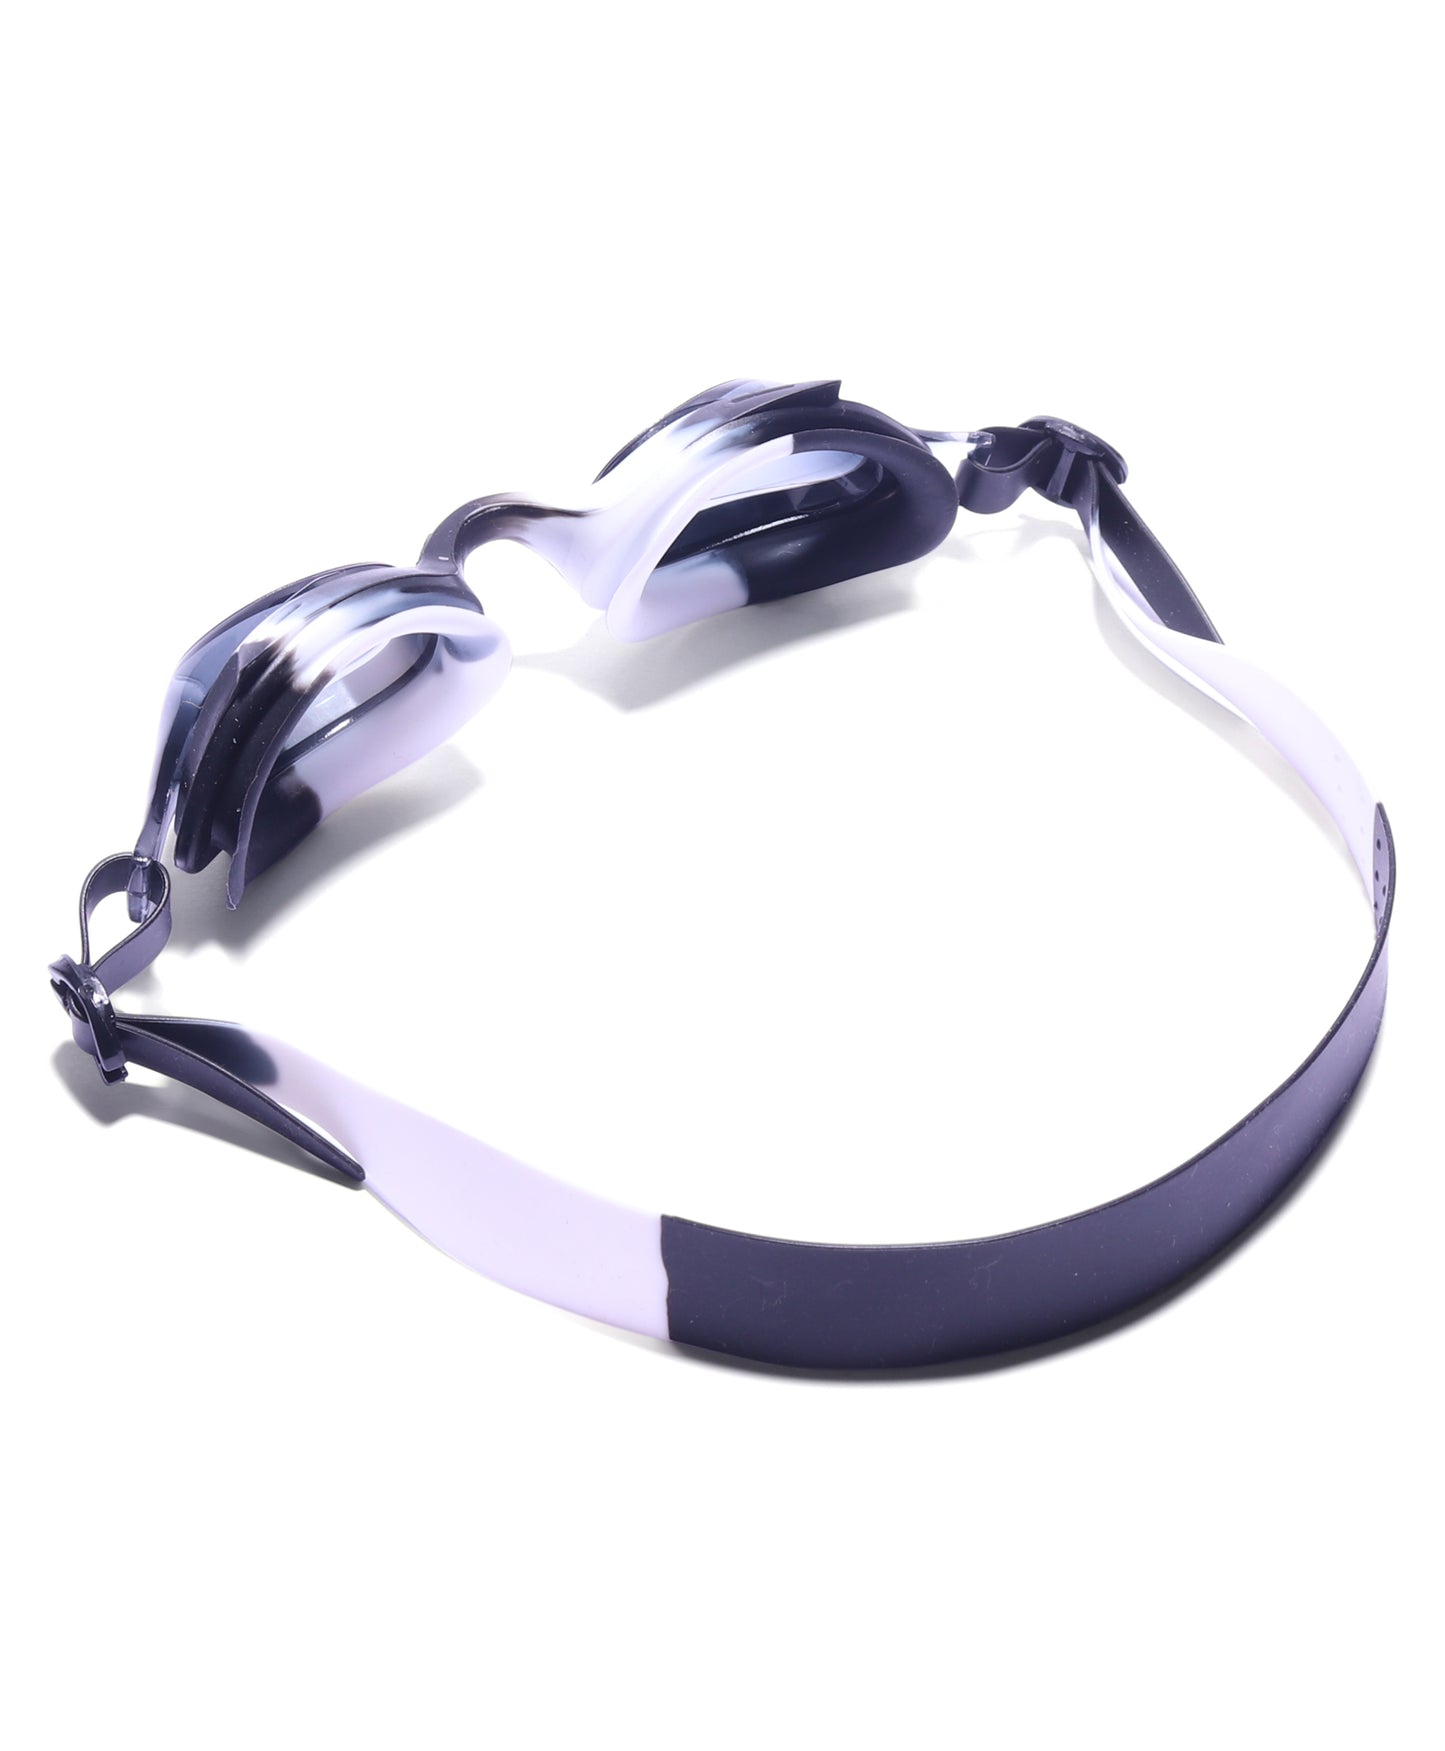 DUAL SHADED SWIMMING GOGGLES - WHITE & BLACK